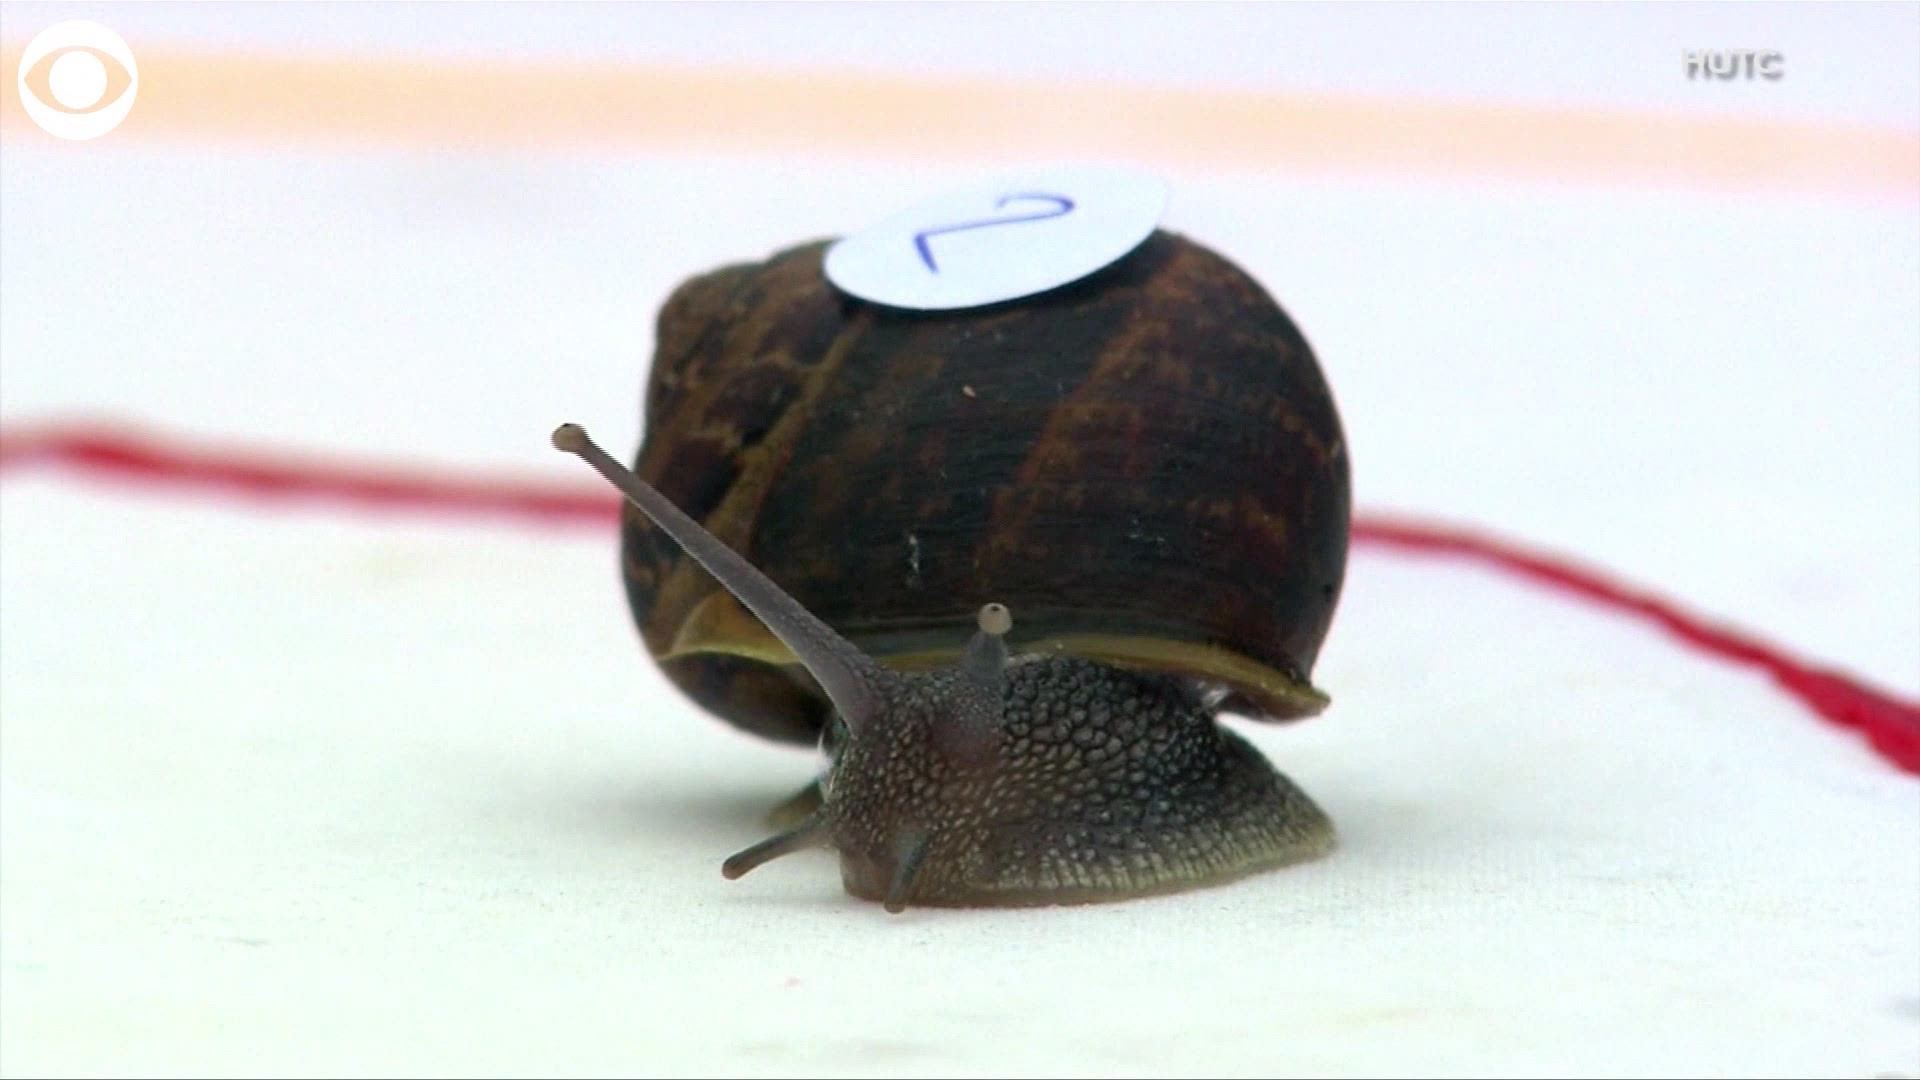 The snails racing at the annual world championships this weekend were just trying their best! Does slow and steady win the race?